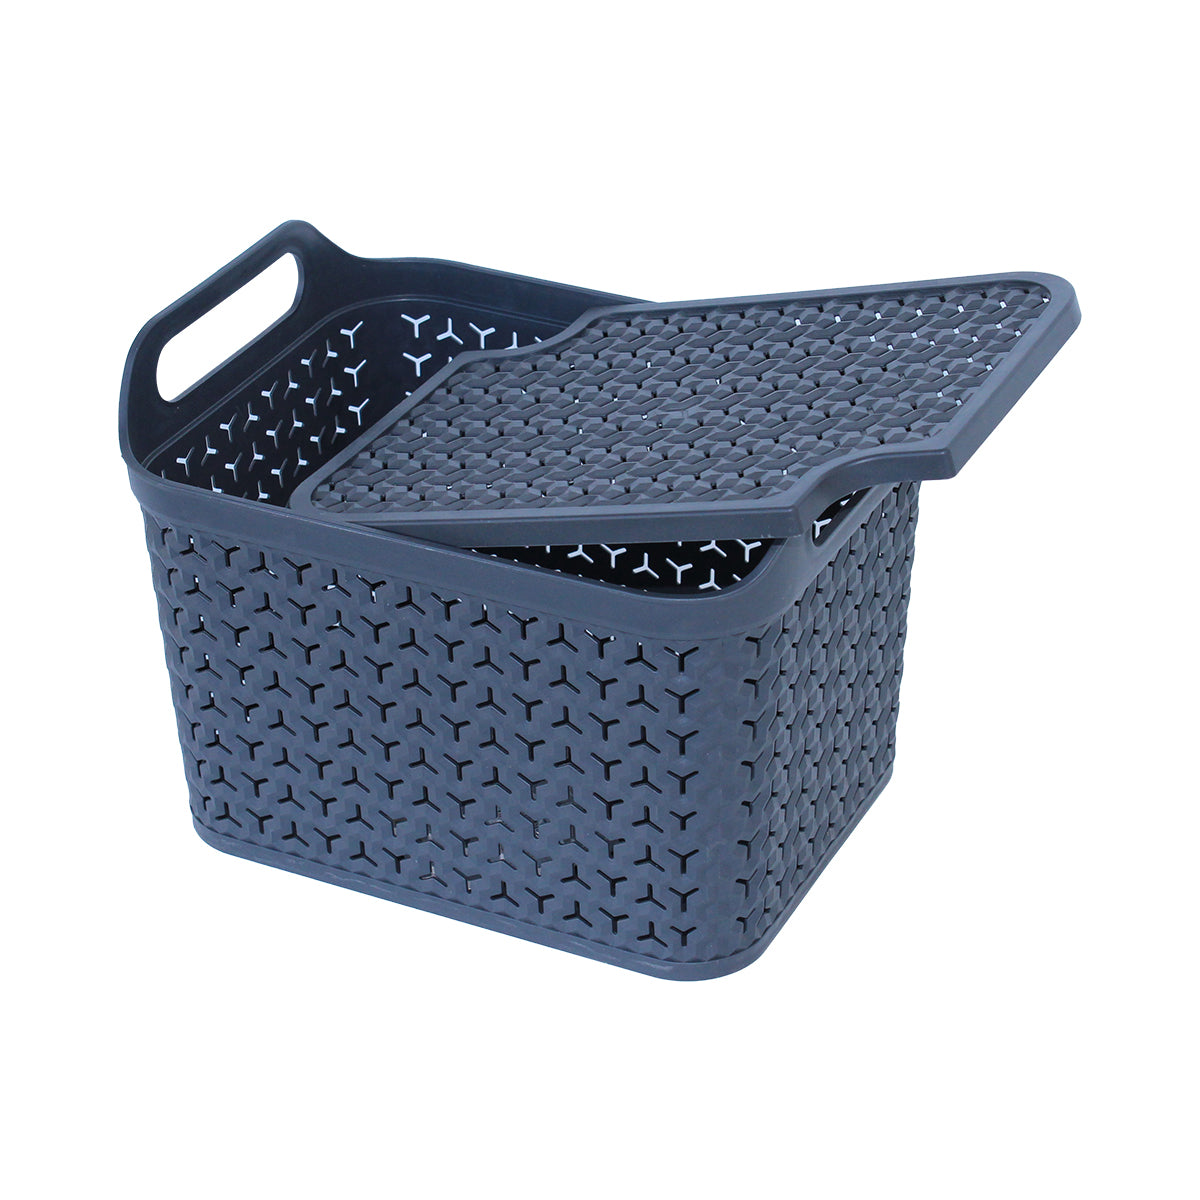 Stackable multi-purpose basket resistant basket made of recycled plastic Charcoal Gray Strata HW123